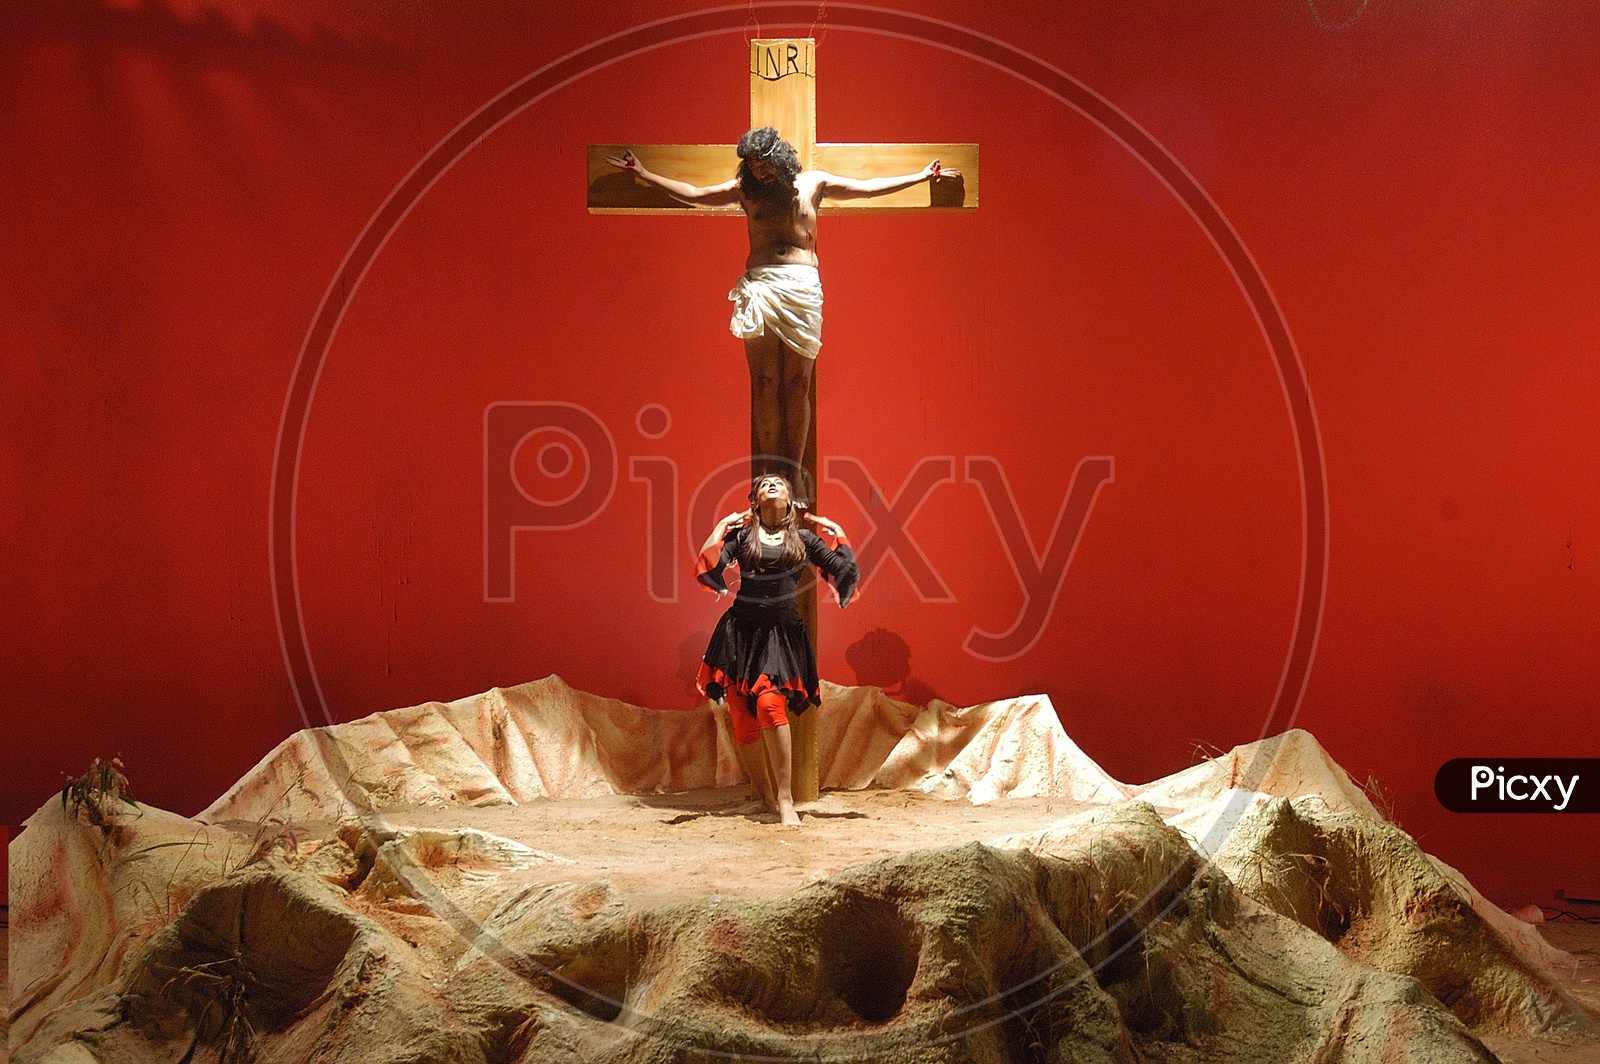 People performing Jesus crucification during a christian skit